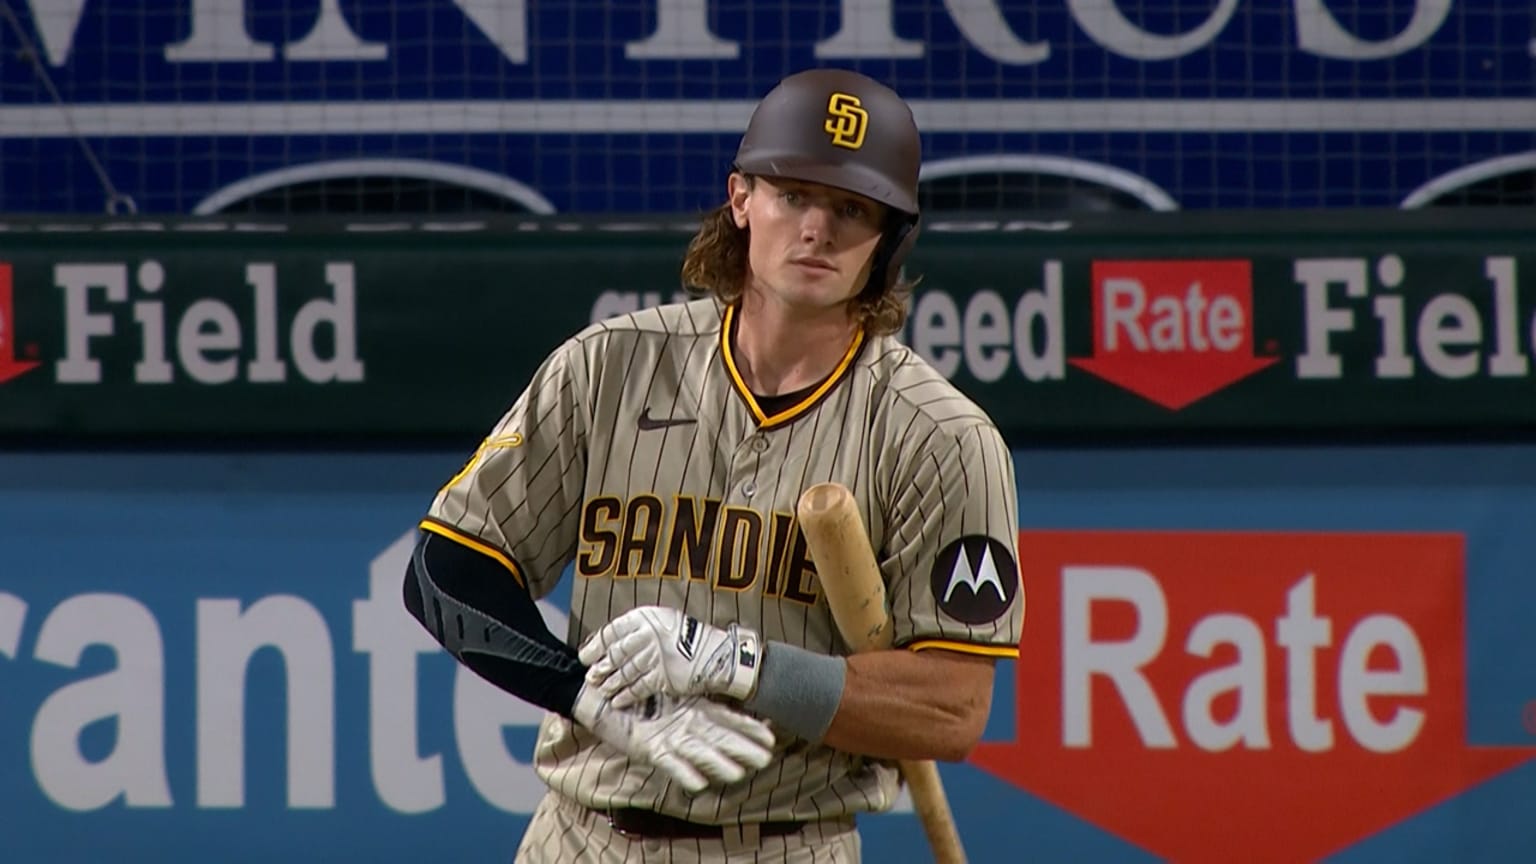 How do non-Padres fans feel about the Padres City Connect jerseys? : r/mlb